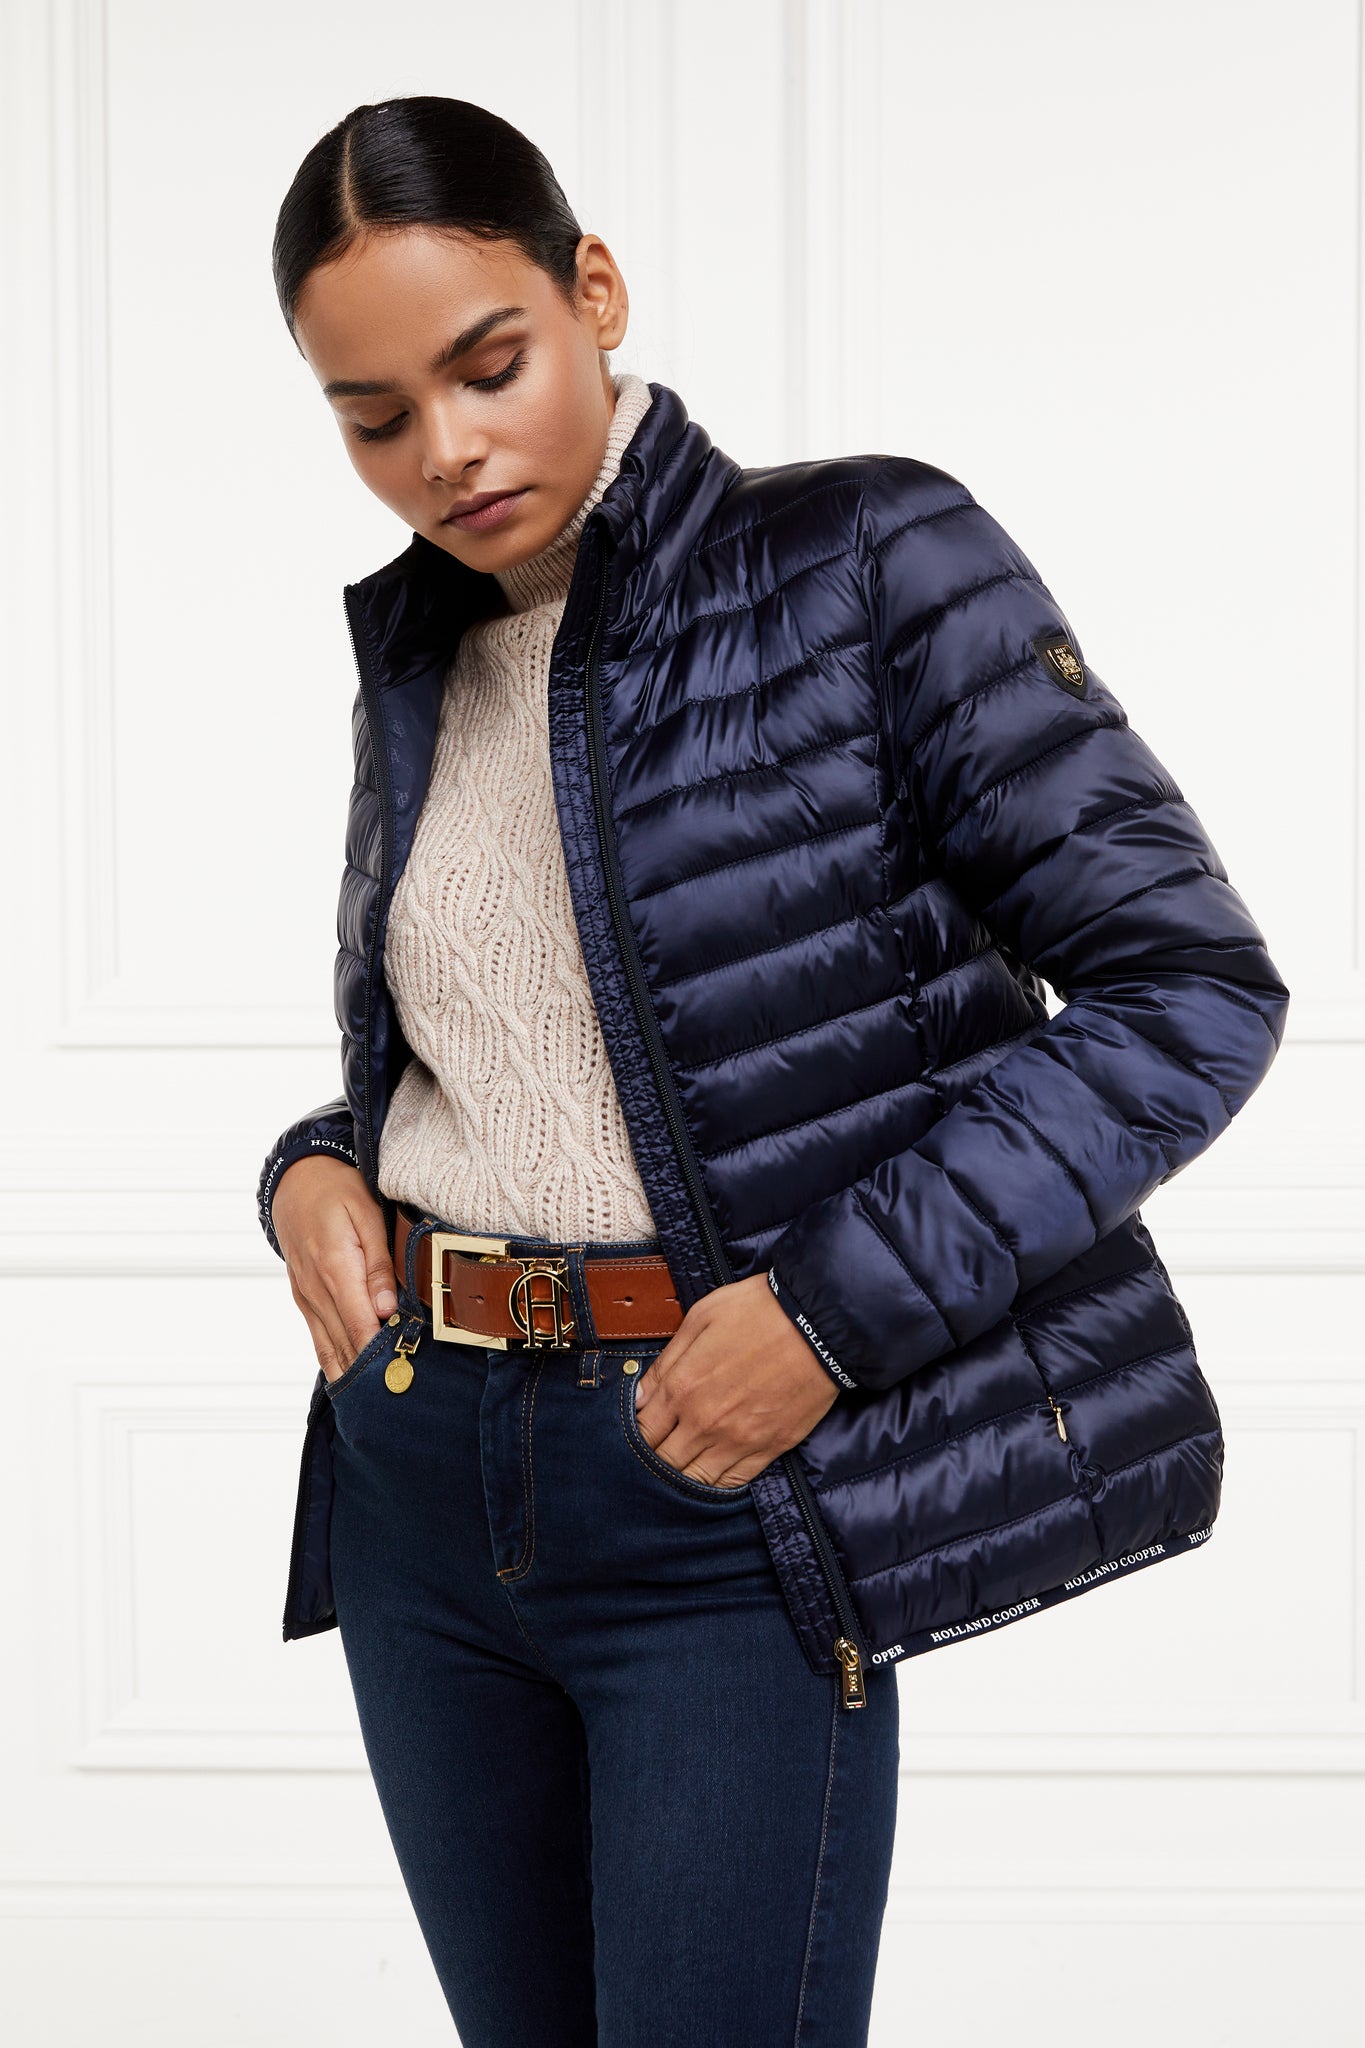 womens lightweight hoodless padded navy jacket with embroidery detail on back high neck and elasticated cuffs and hem. easily packs away into seperate small bag of the same colour with handle 